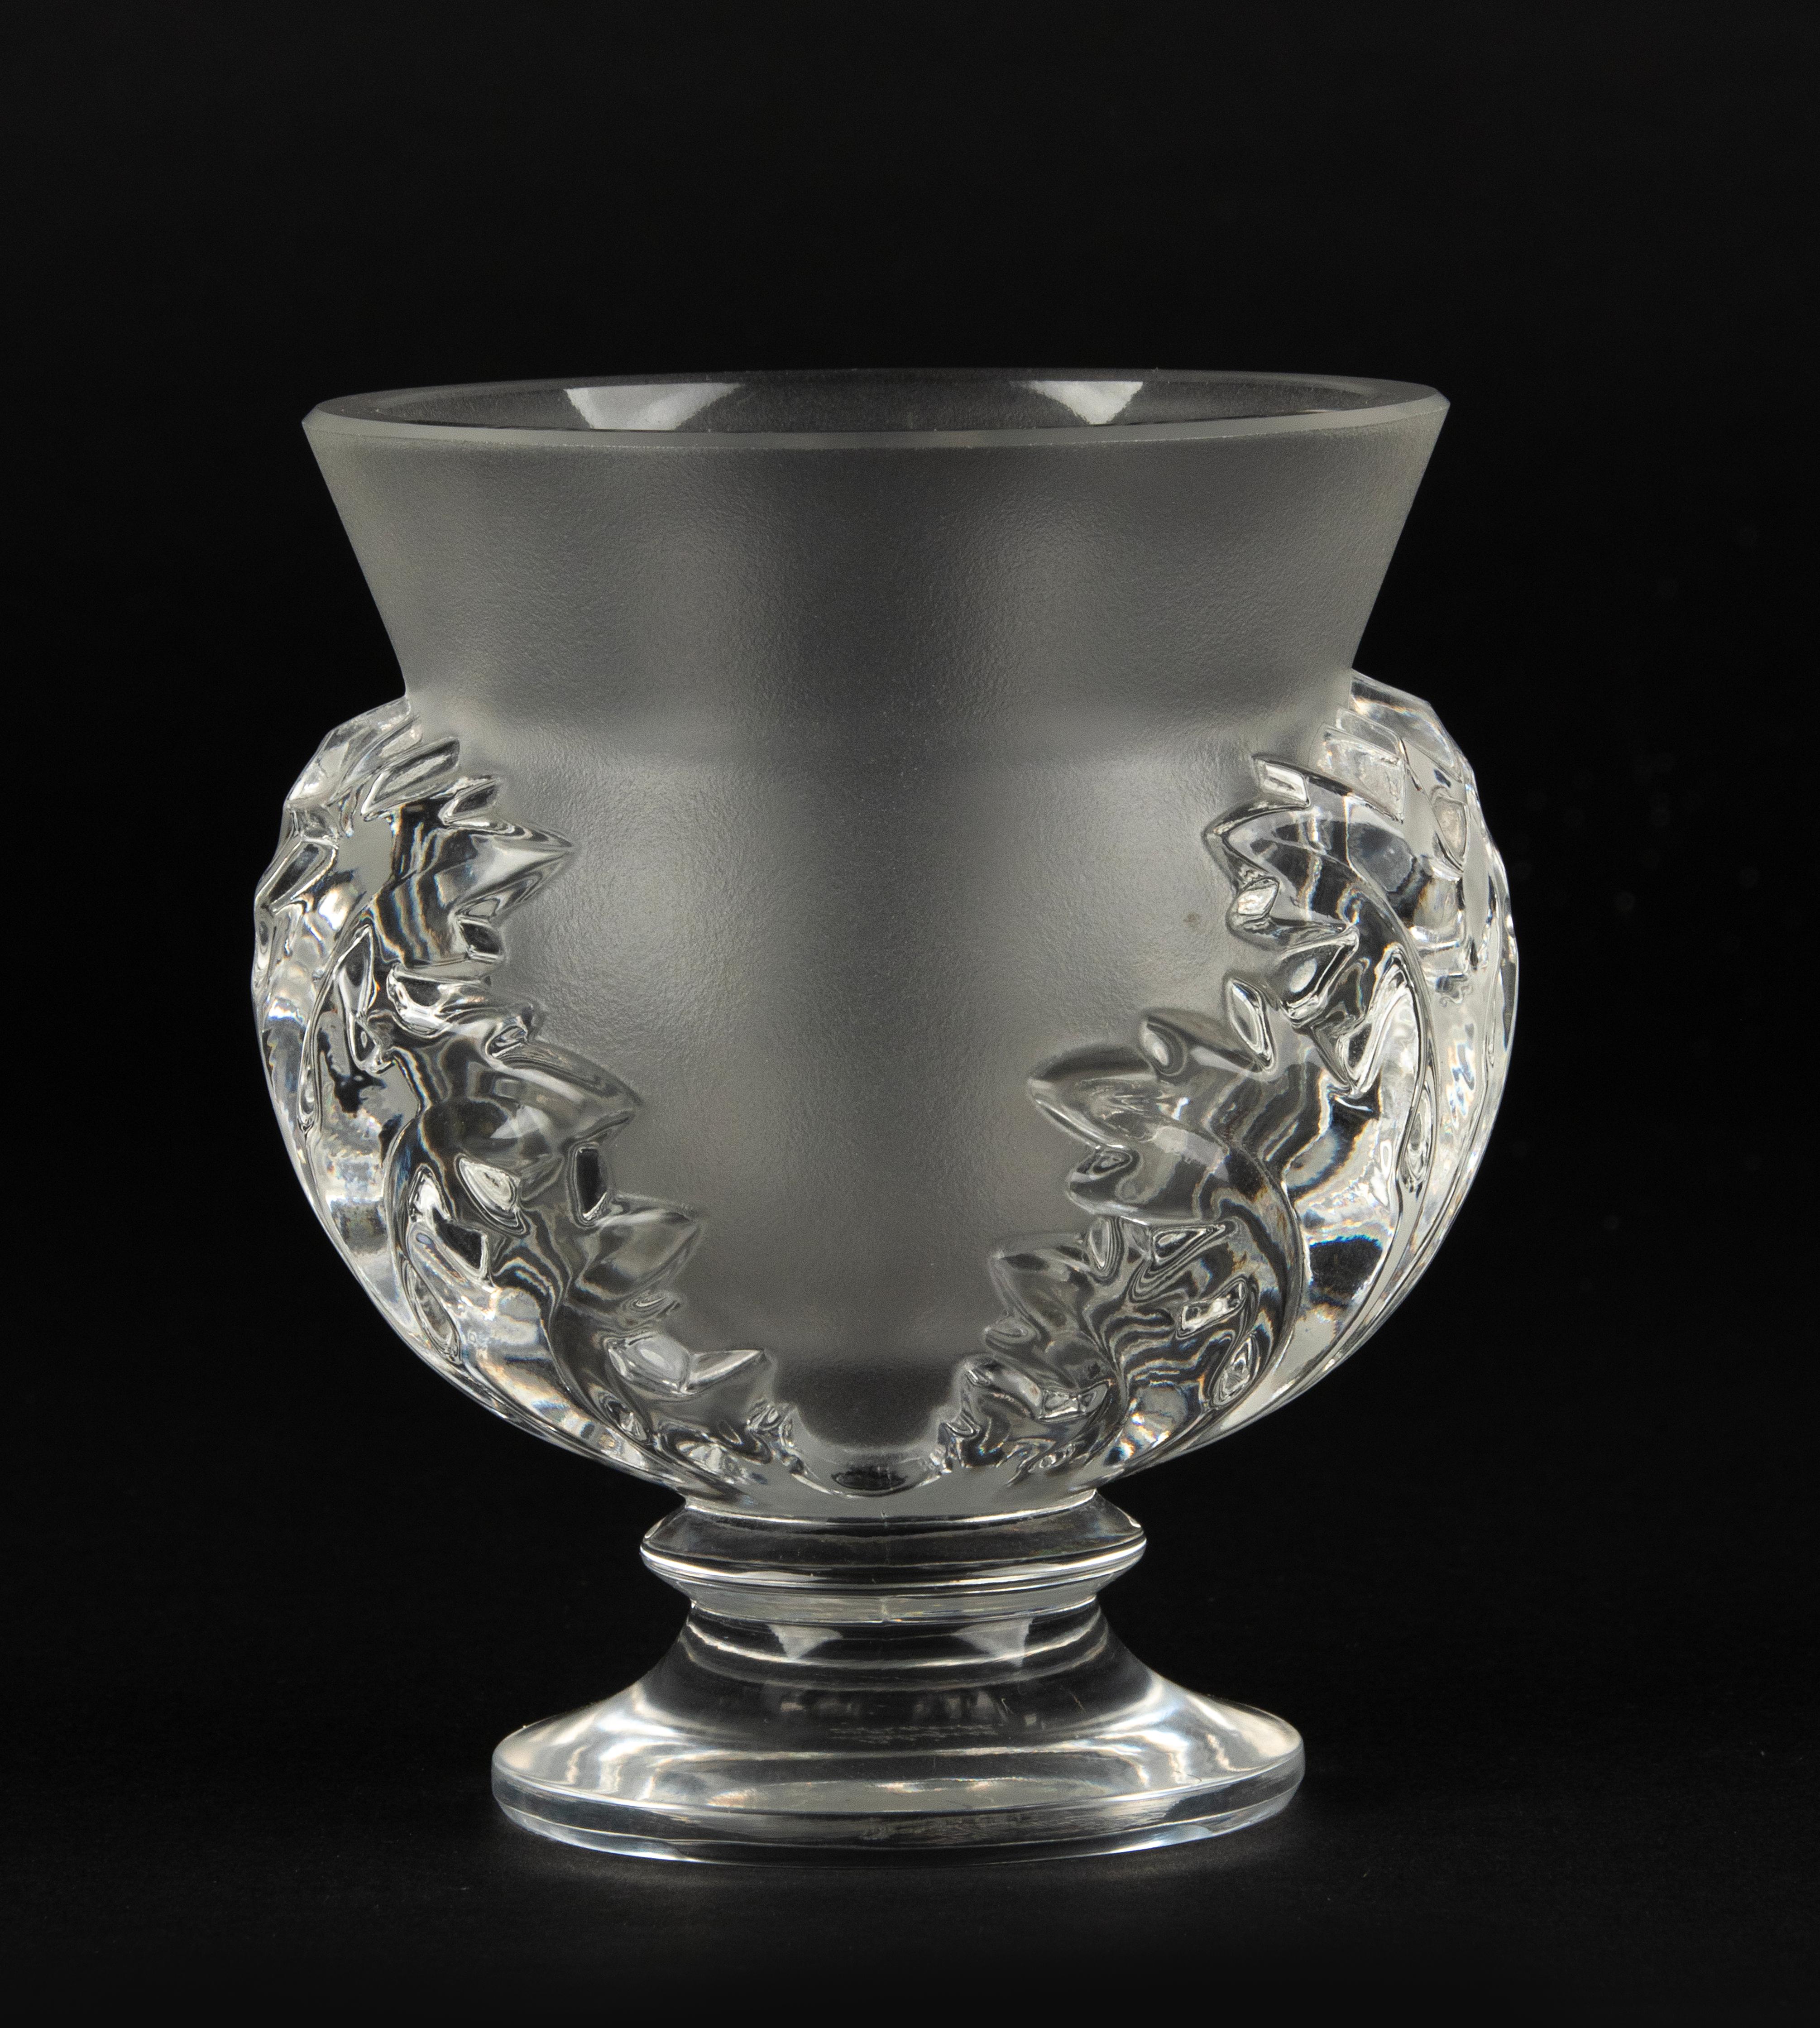 A lovely little crystal vase, made by the French brand Lalique. 
The name of the model is Saint Cloud. 
The vase is in very good condition. No chips and no hairlines. 
Signed on the bottom. 

Dimensions: 10 x 11 cm and 12 cm tall
Free shipping